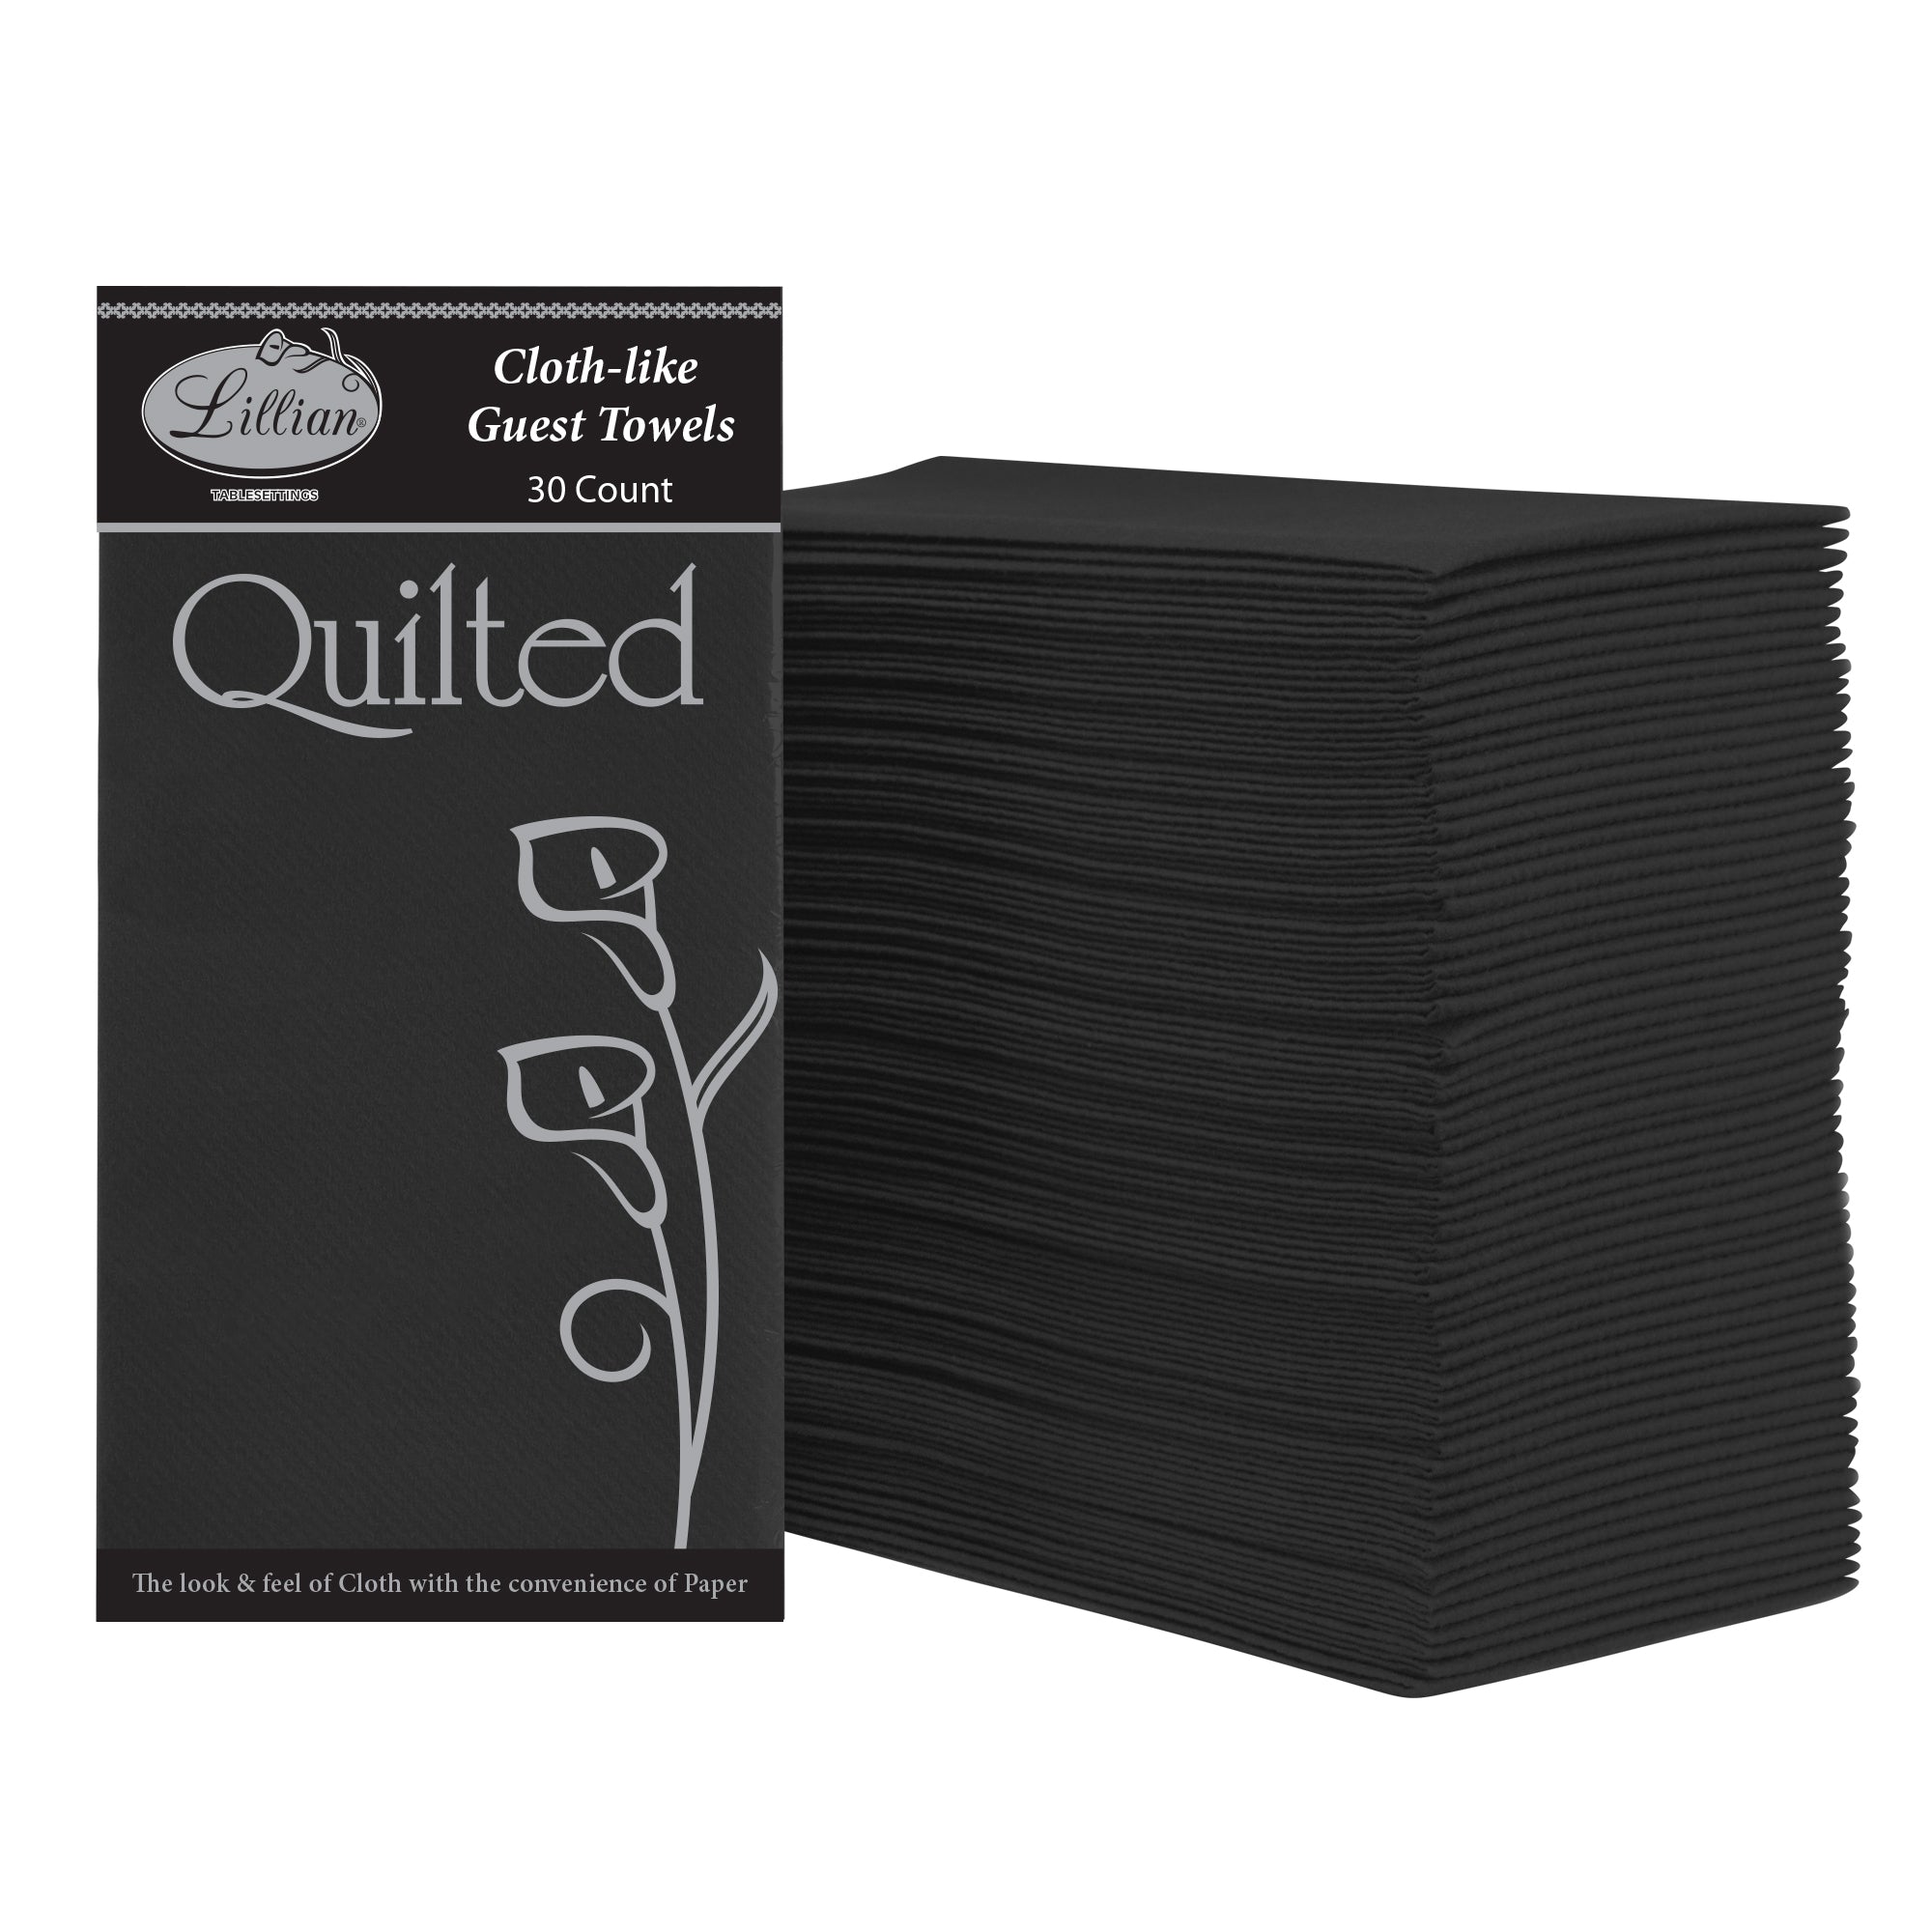 Quilted Premium Paper Cloth-Like Guest Towel